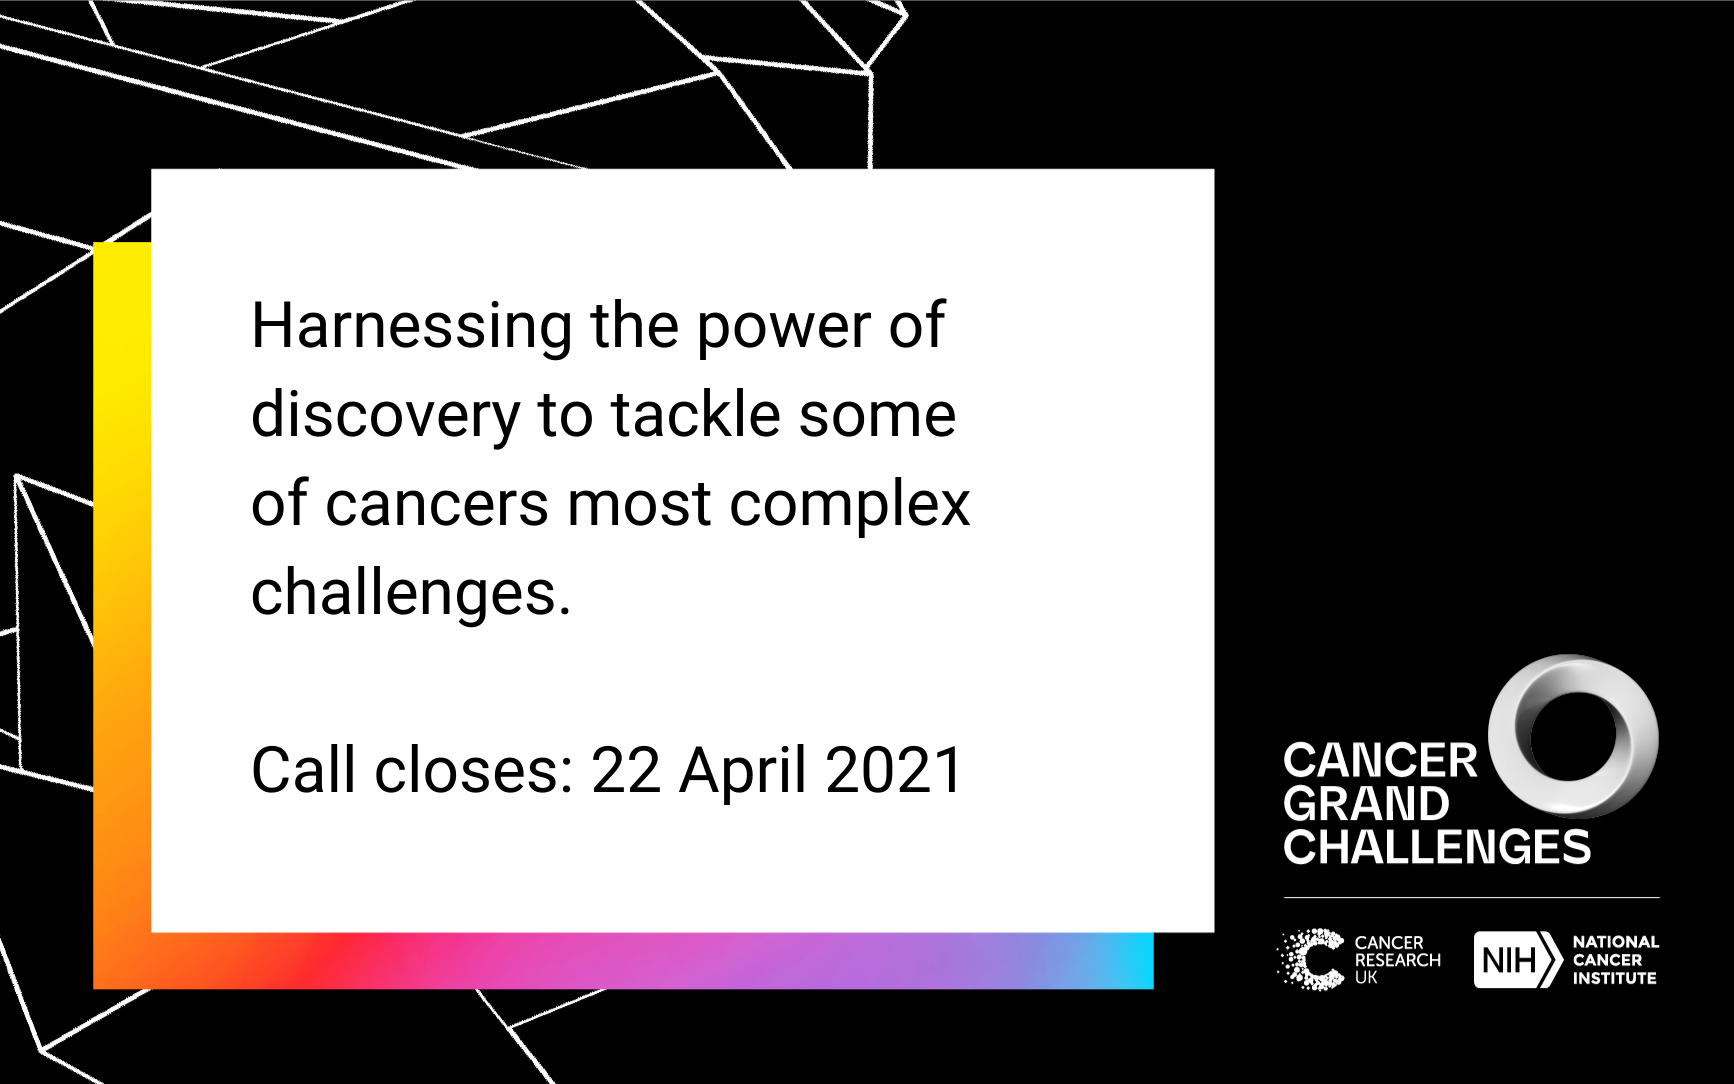 Cancer Grand Challenges 